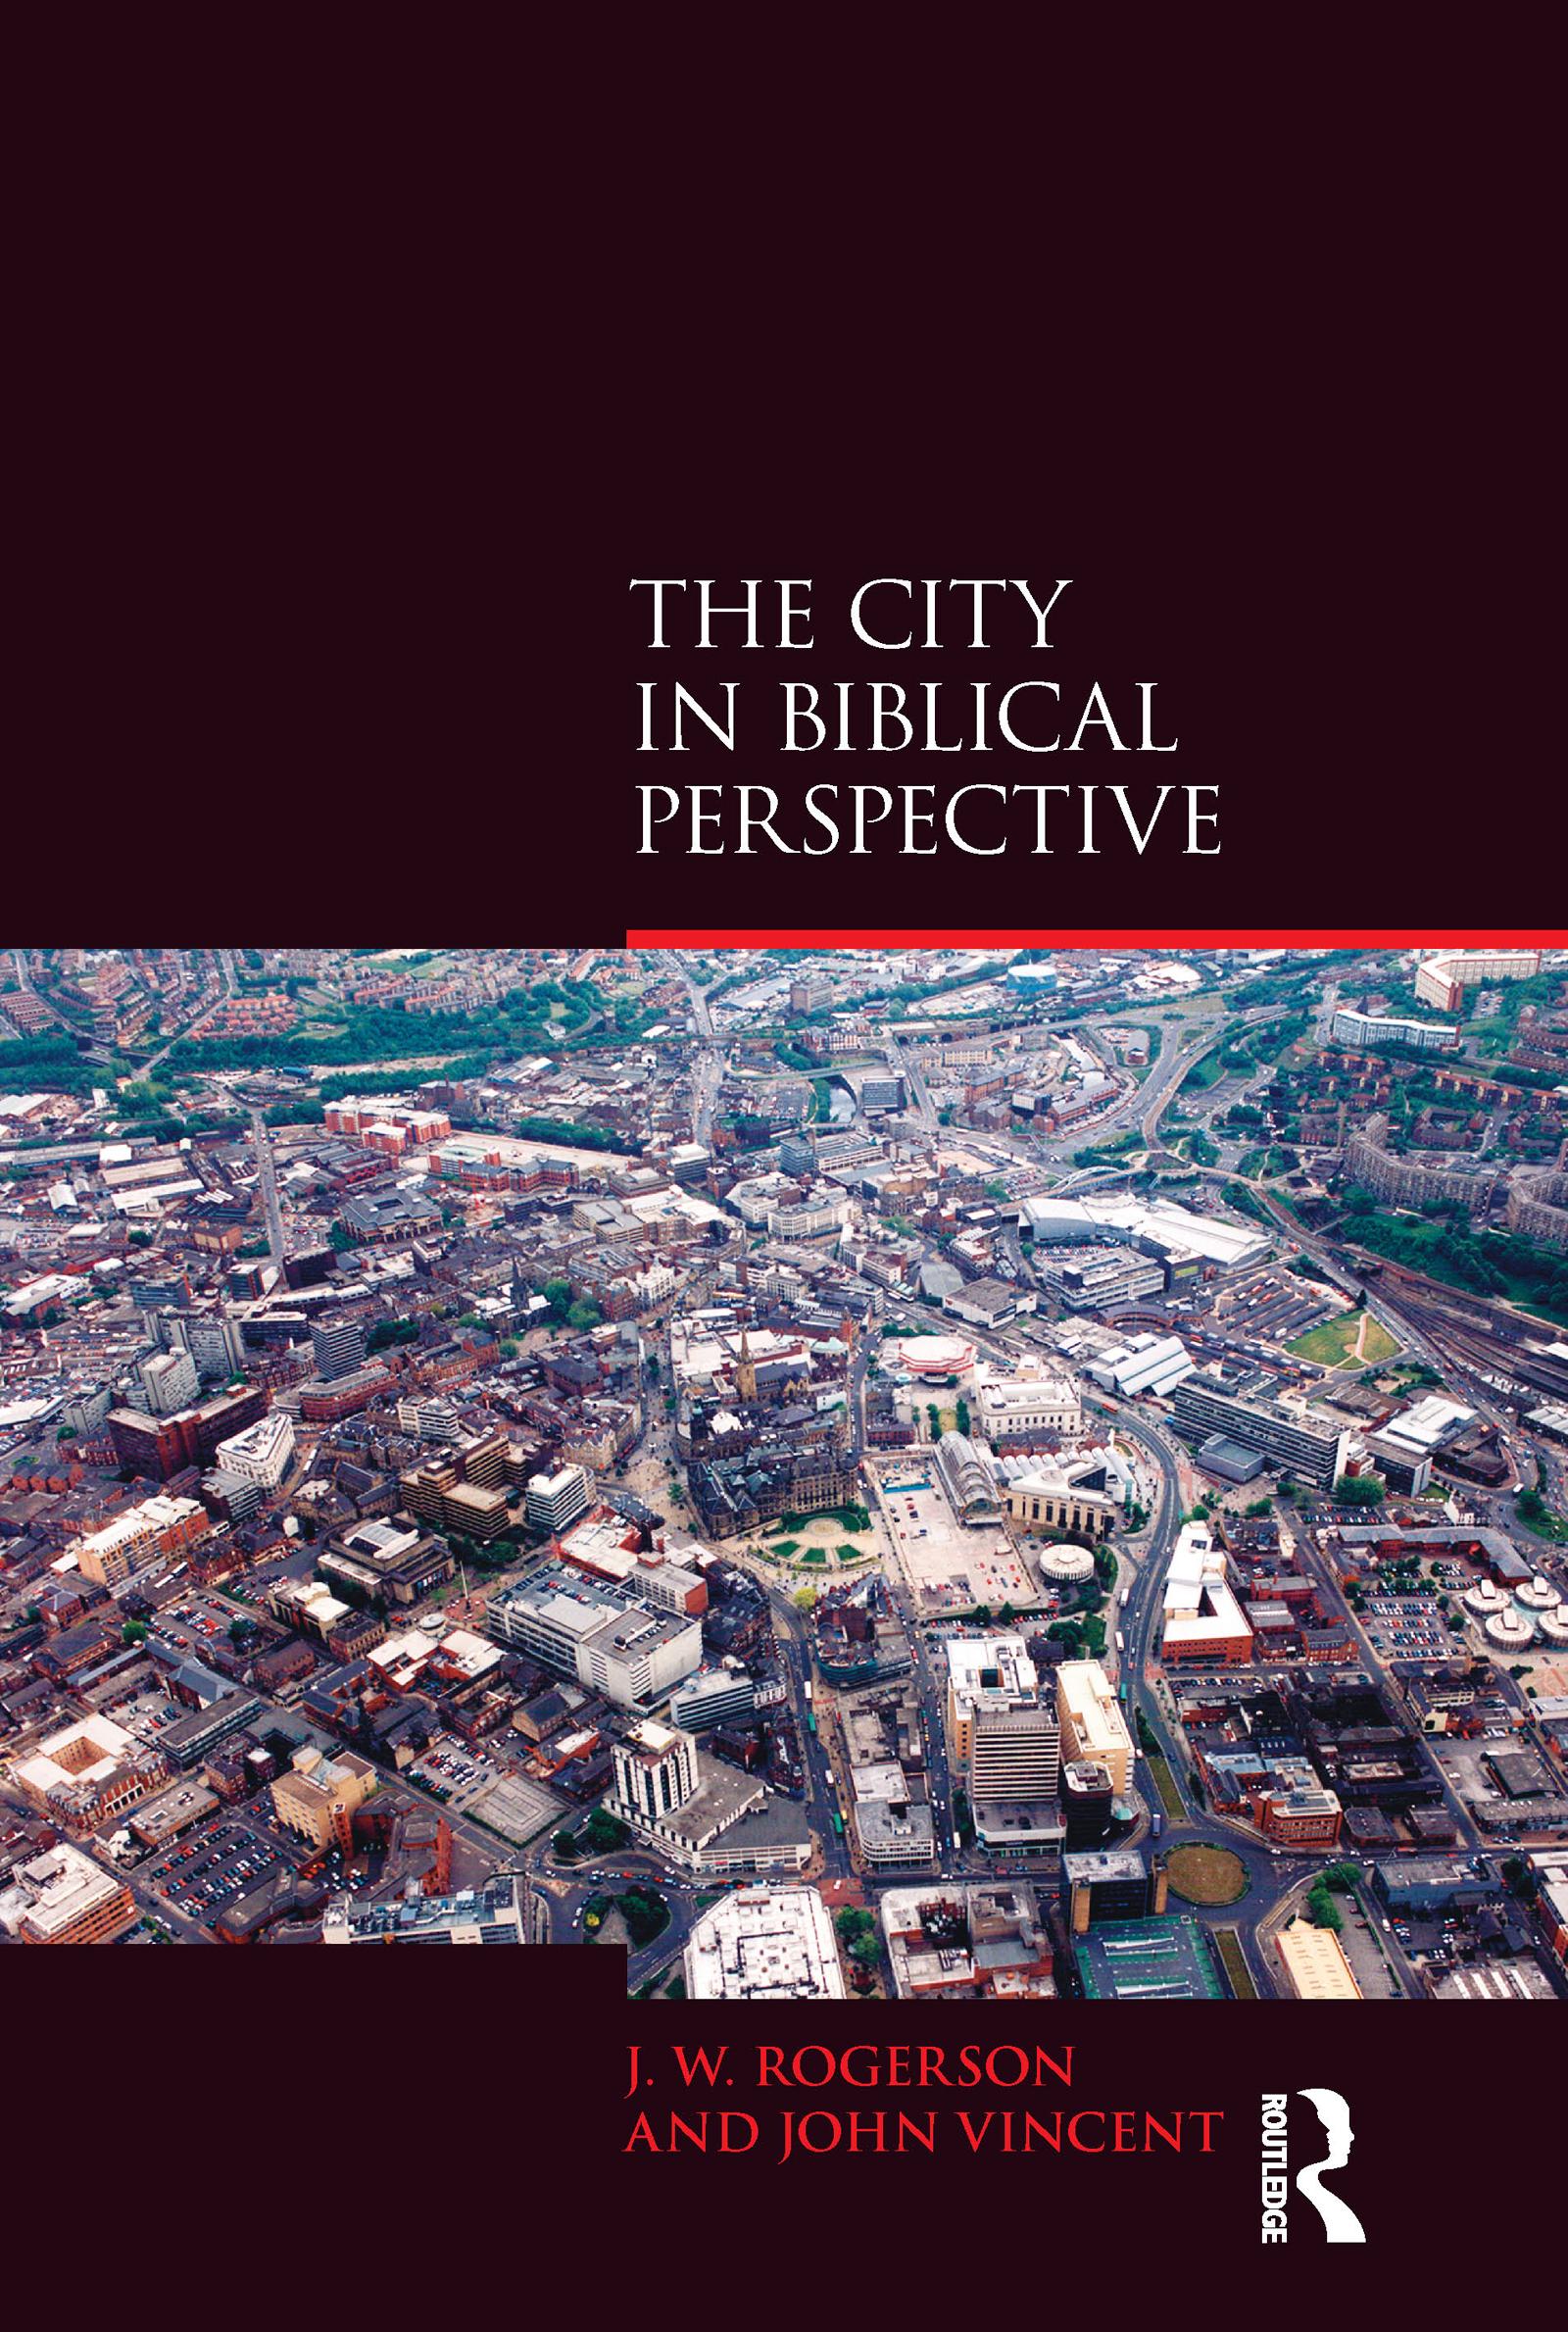 The City in Biblical Perspective - J.W. Rogerson|John Vincent